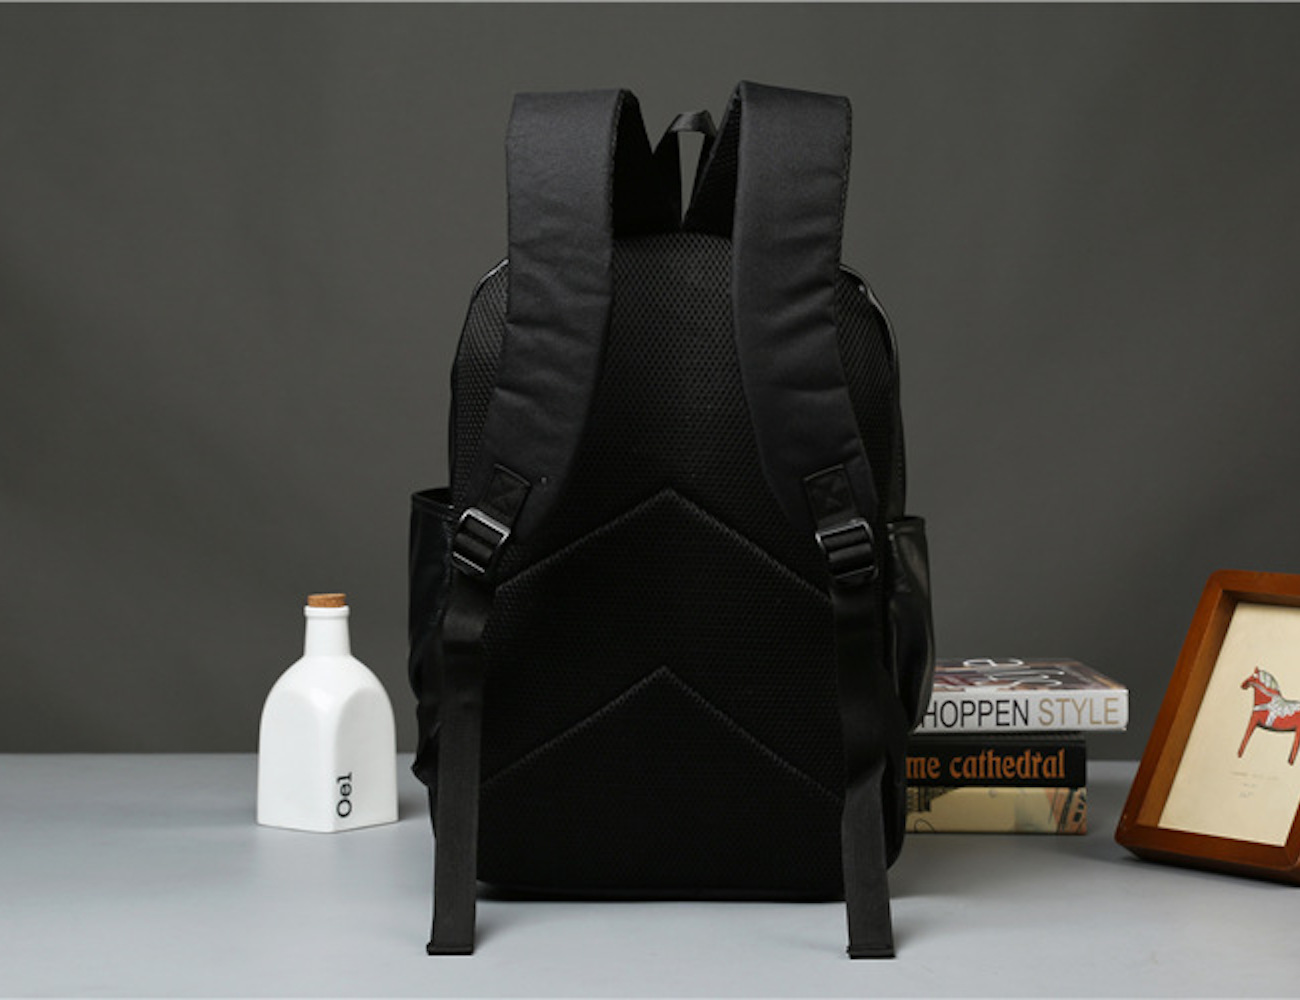 Carry Your Daily Essentials in Style with This Men's Backpack